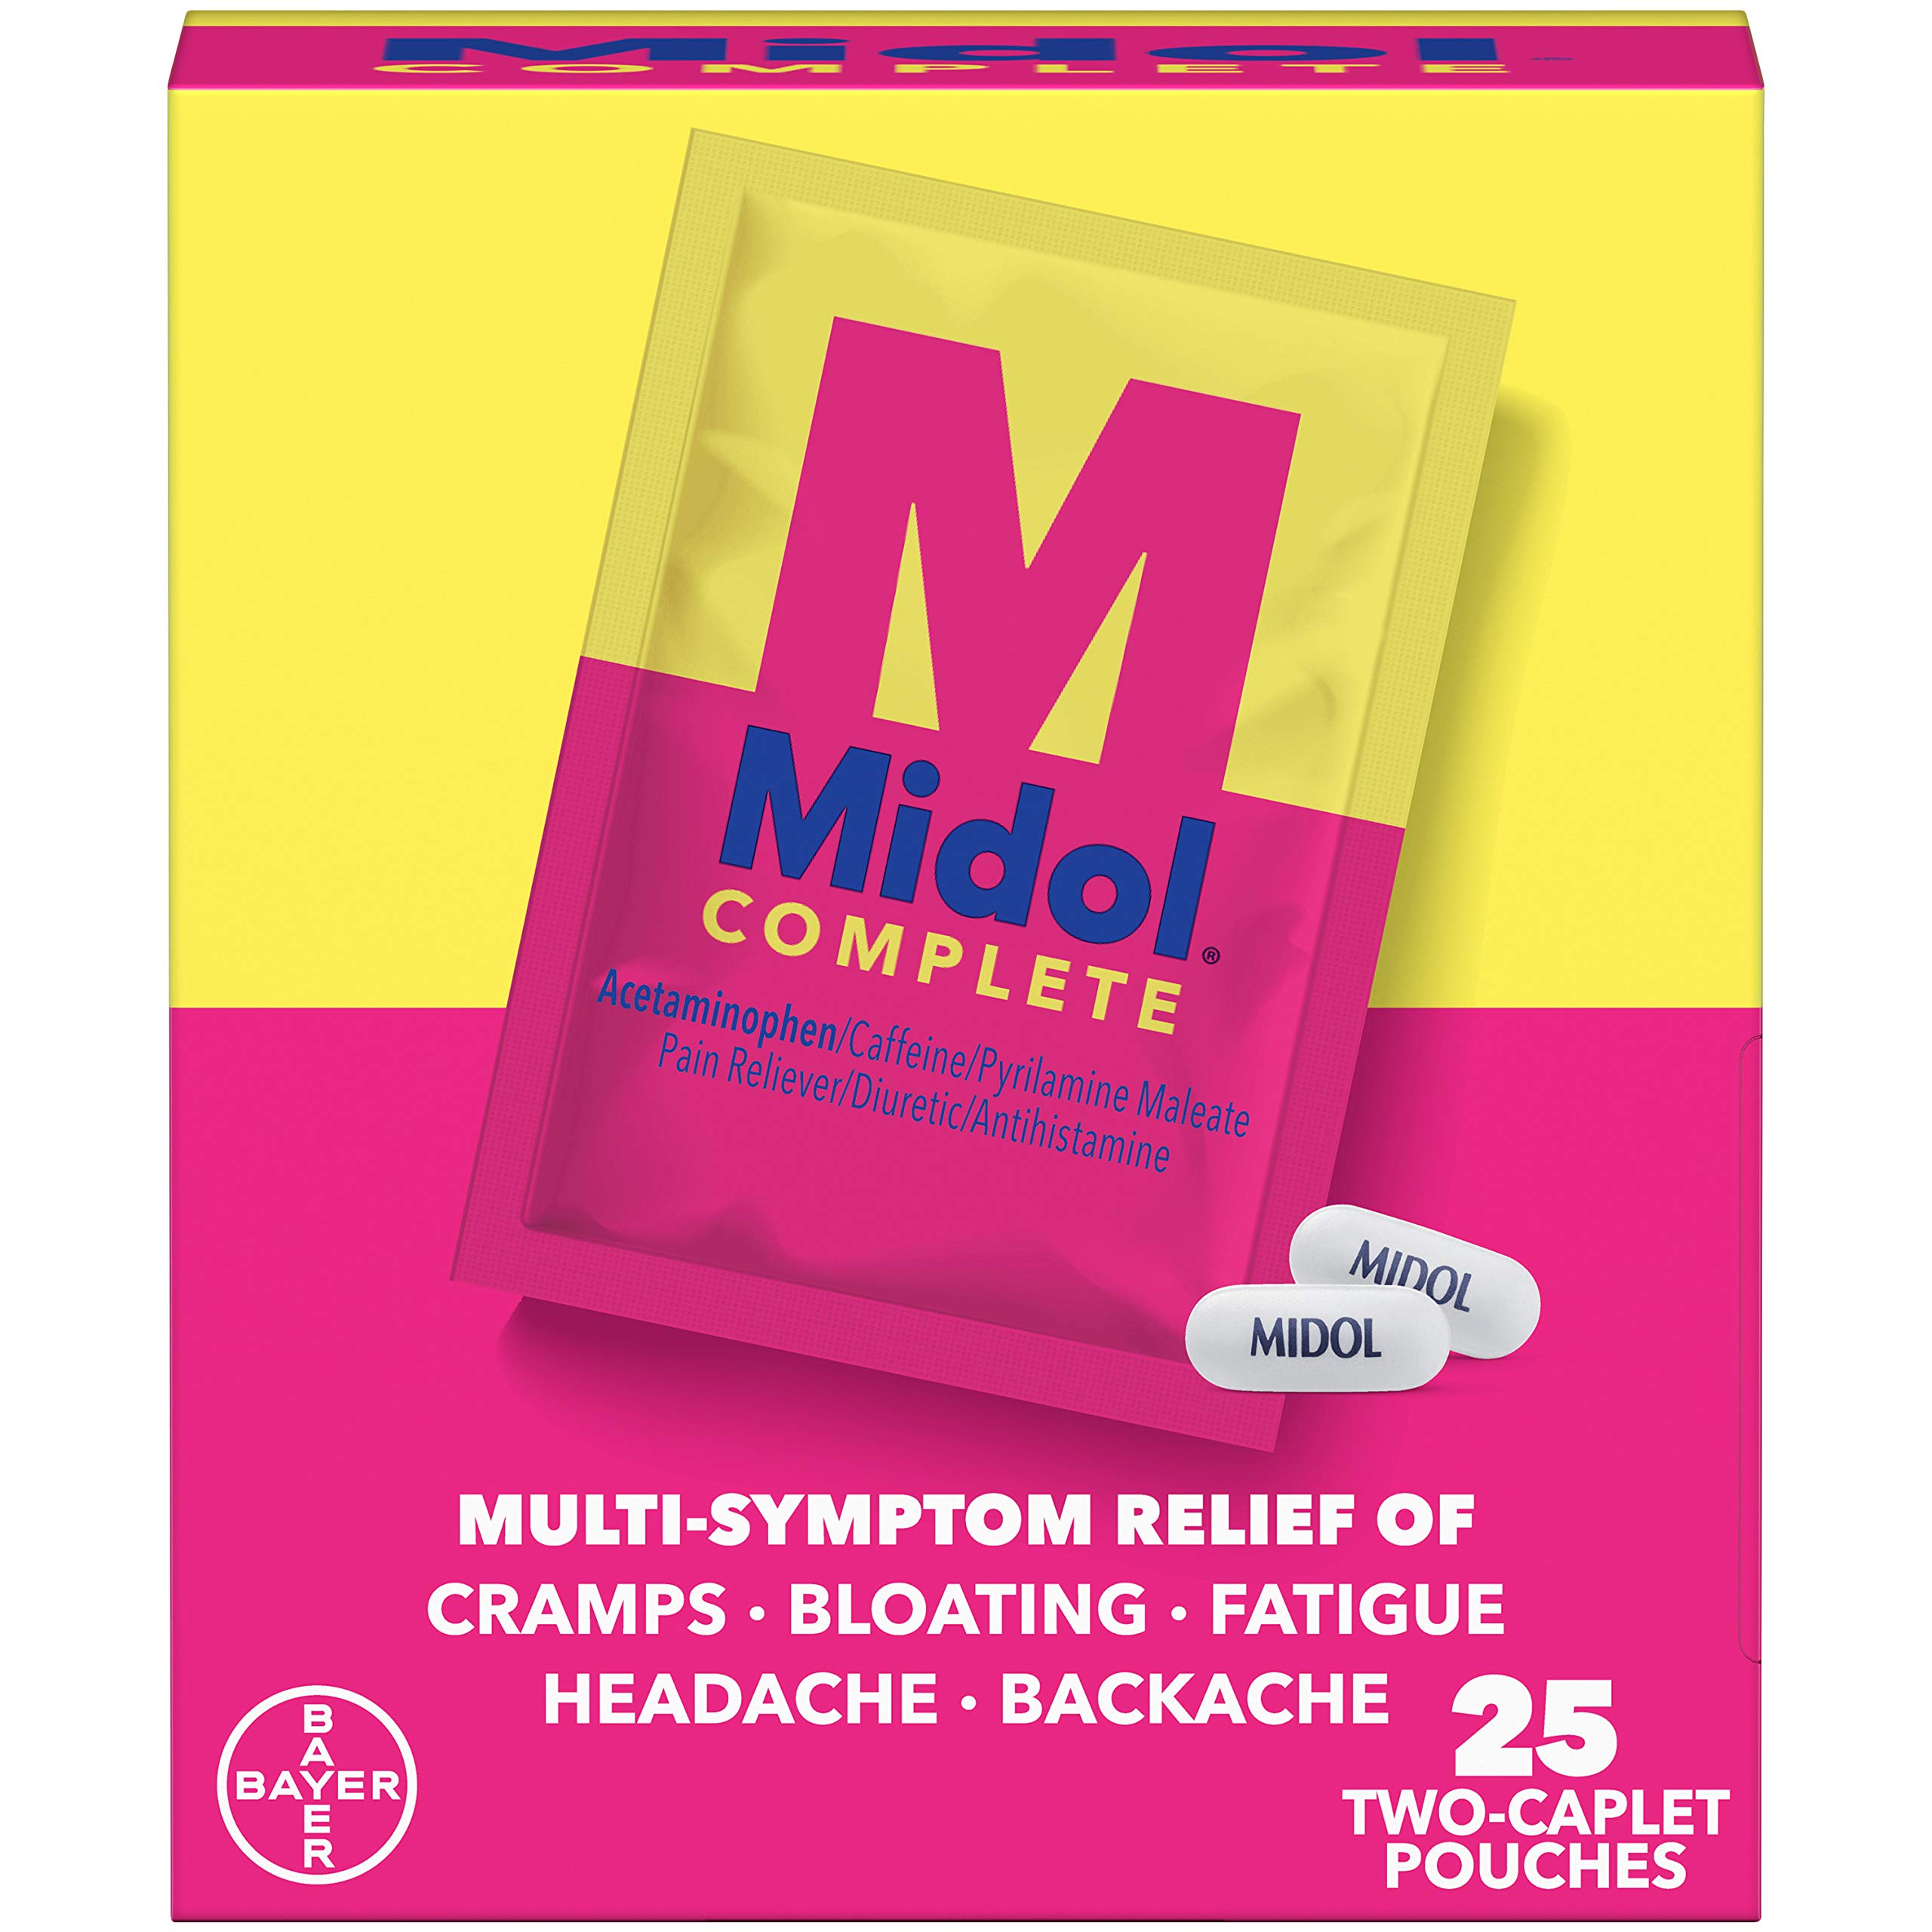 Midol Complete Caplets with Acetaminophen for Menstrual Symptom Relief - 50 Count (25 Pouches of 2 ), On The Go Menstrual Pain R